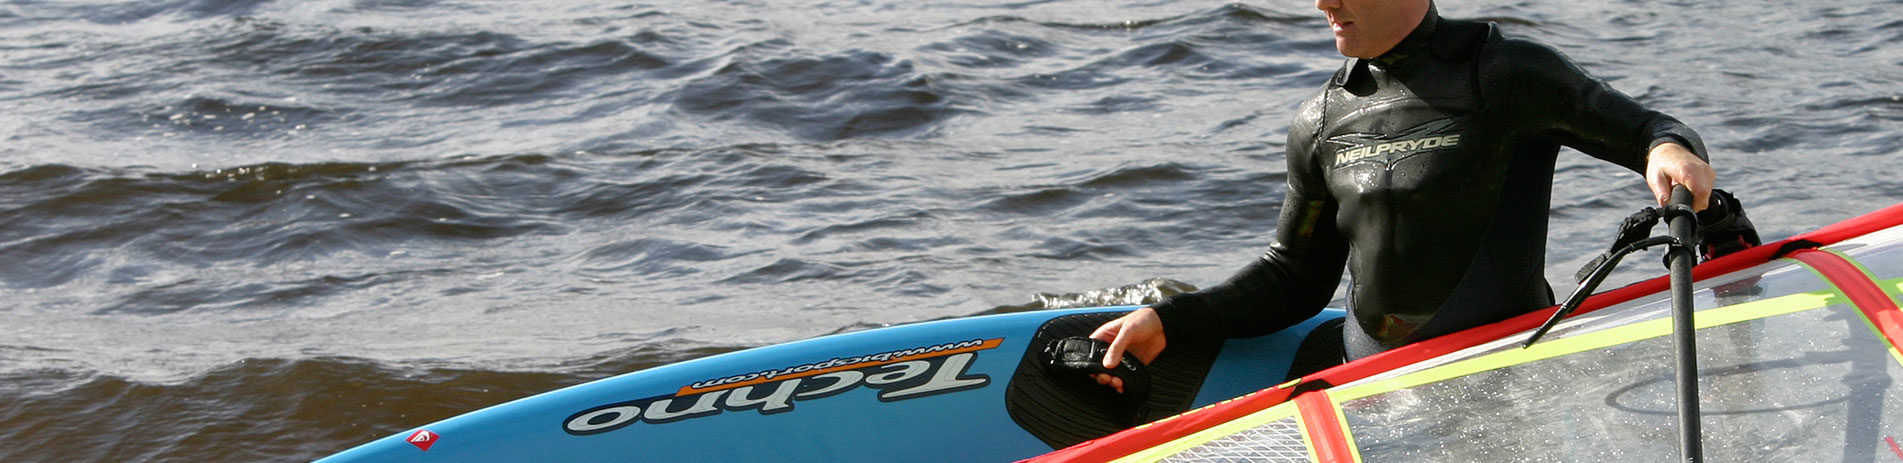 close-up-of-middle-aged-man-in-wetsuit-holding-paddleboard-and-veil-coming-out-of-loch-water